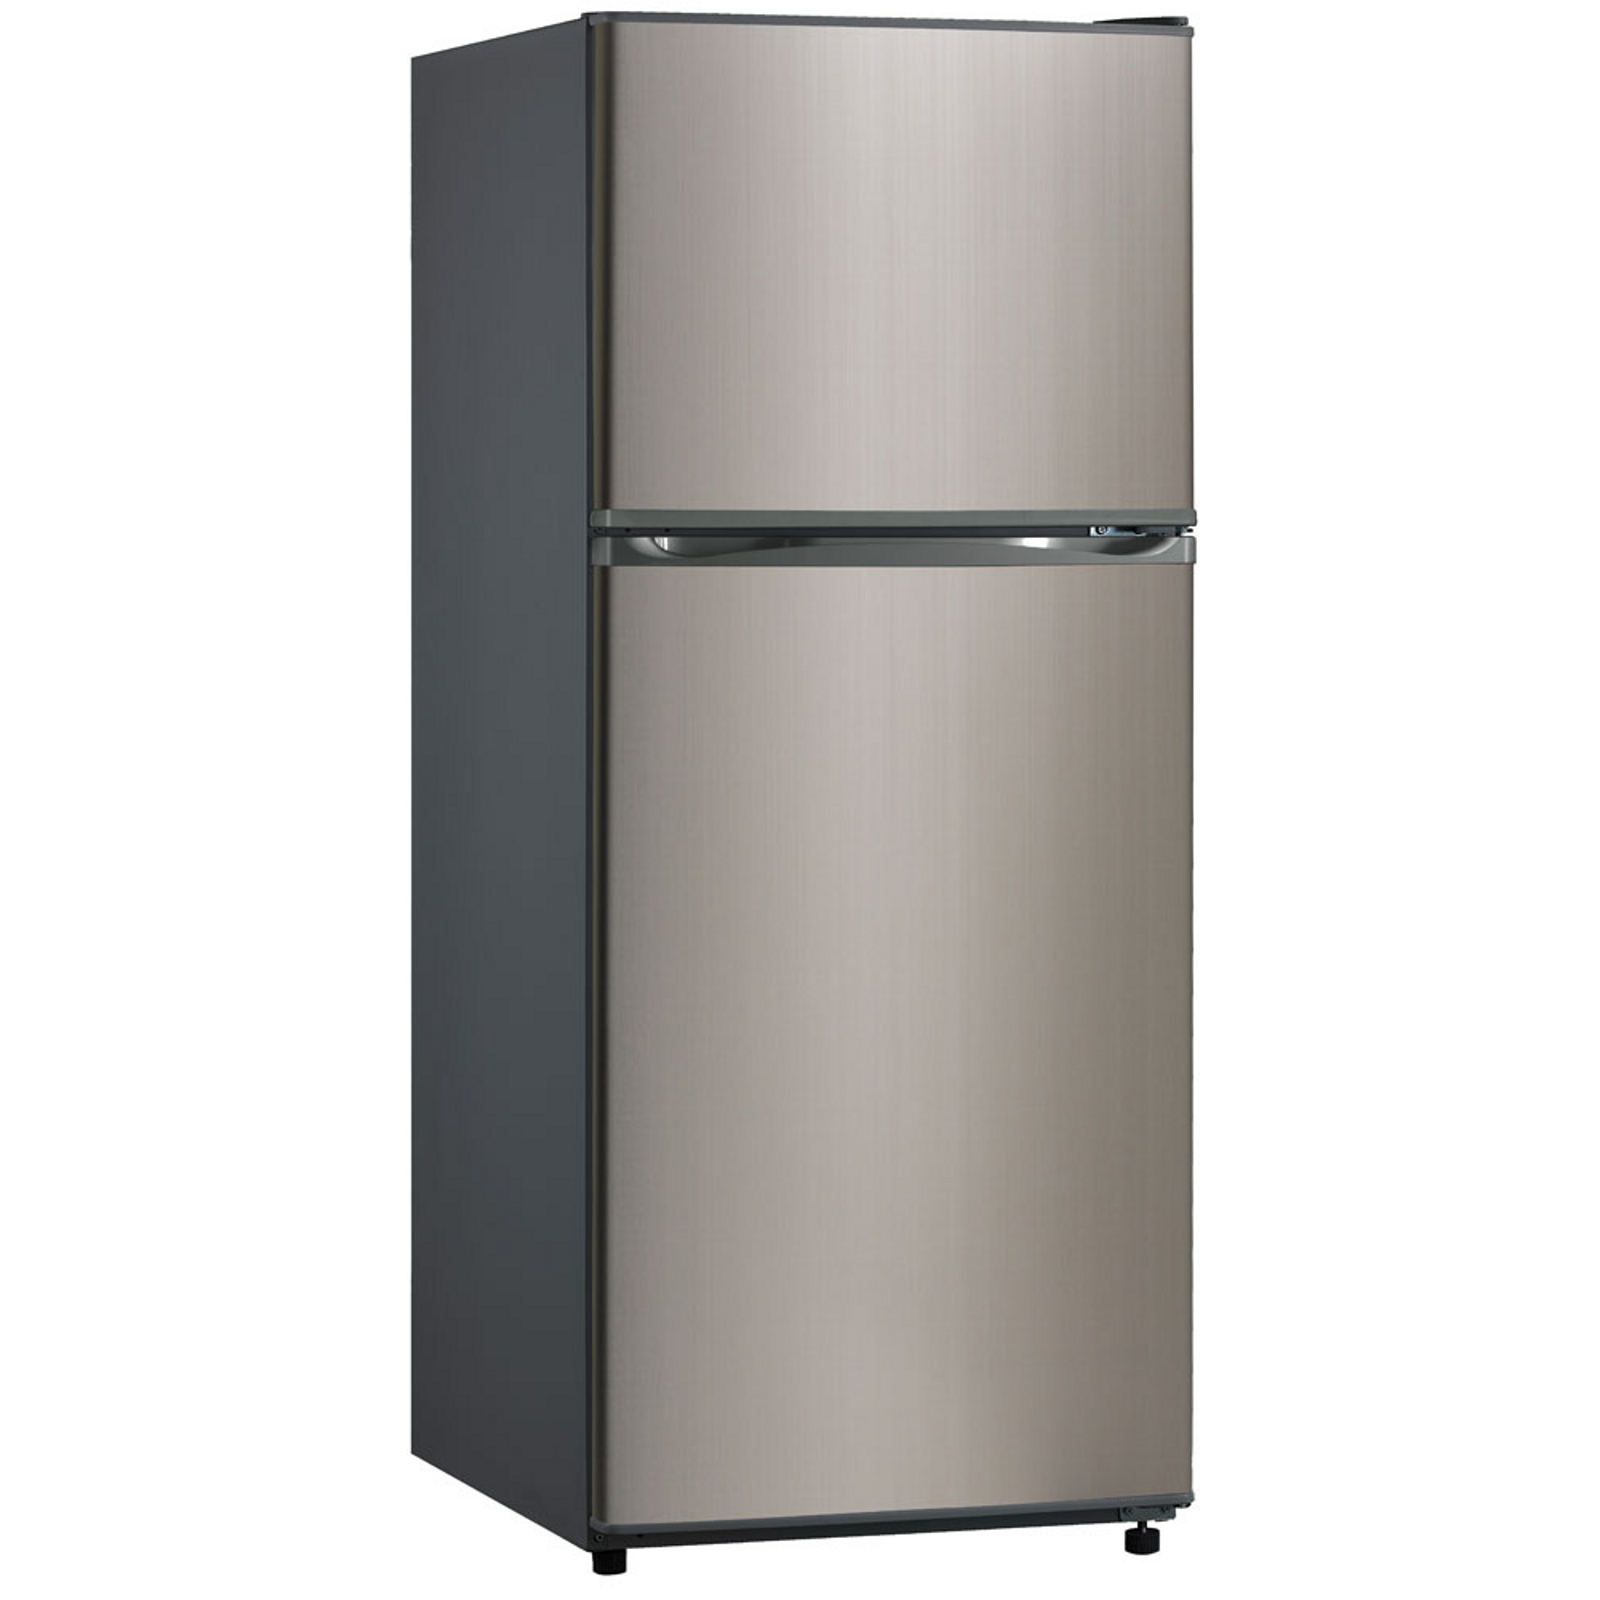 Equator-Midea RF423FW- 1220 SS 12 Cu. Ft. Energy Star Frost Free Top Freezer Refrigerator with Reversible Door in Stainless Steel